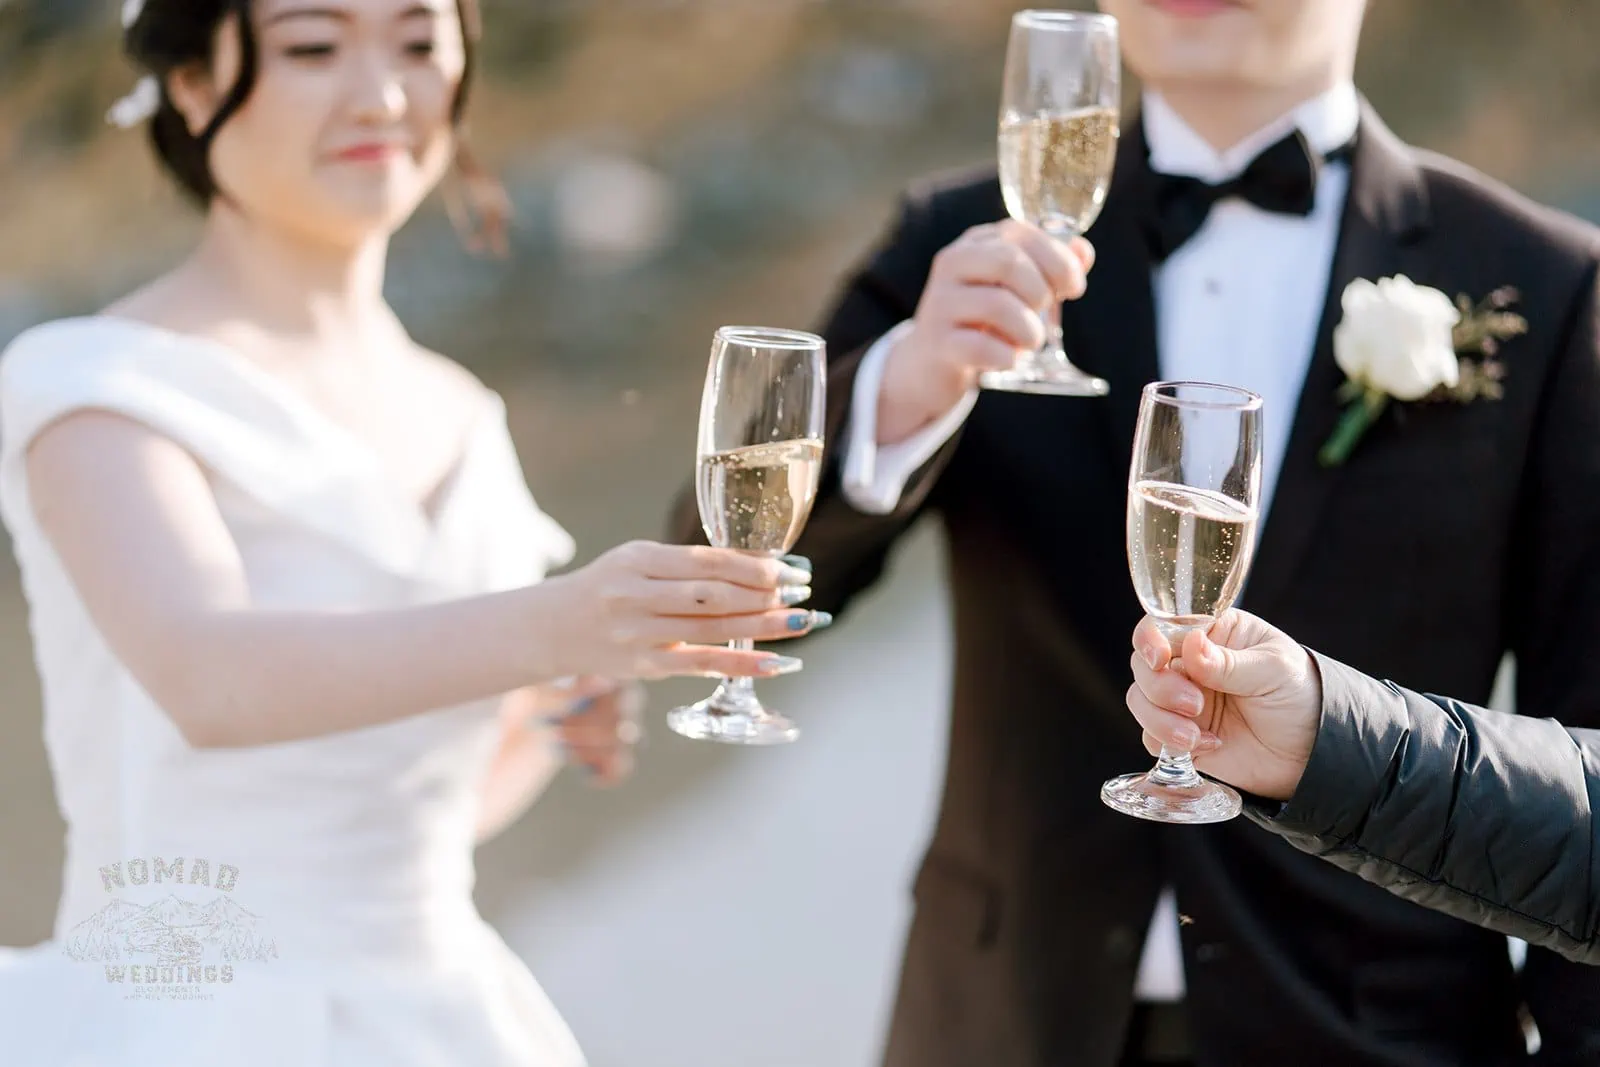 Queenstown New Zealand Elopement Wedding Photographer - A pre-wedding photoshoot featuring Bo and Junyi with champagne glasses.